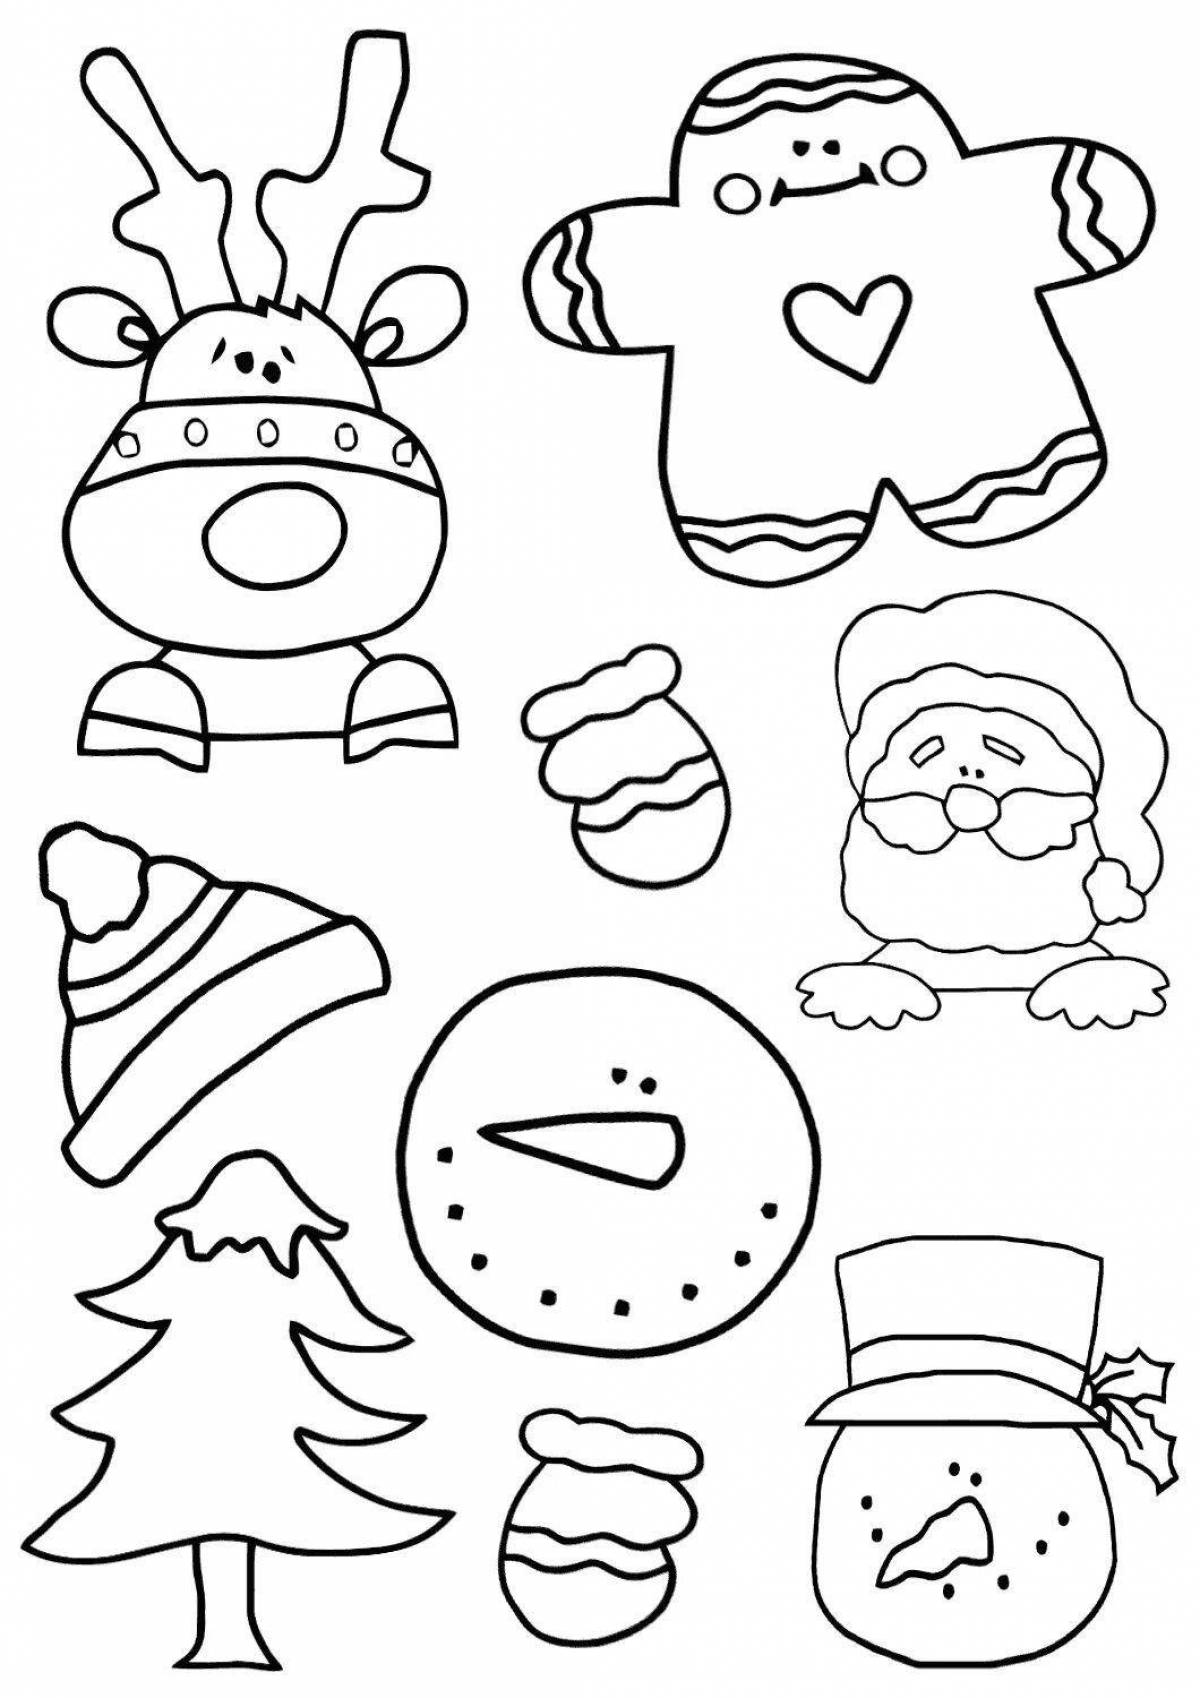 Colored stickers for coloring pages for children